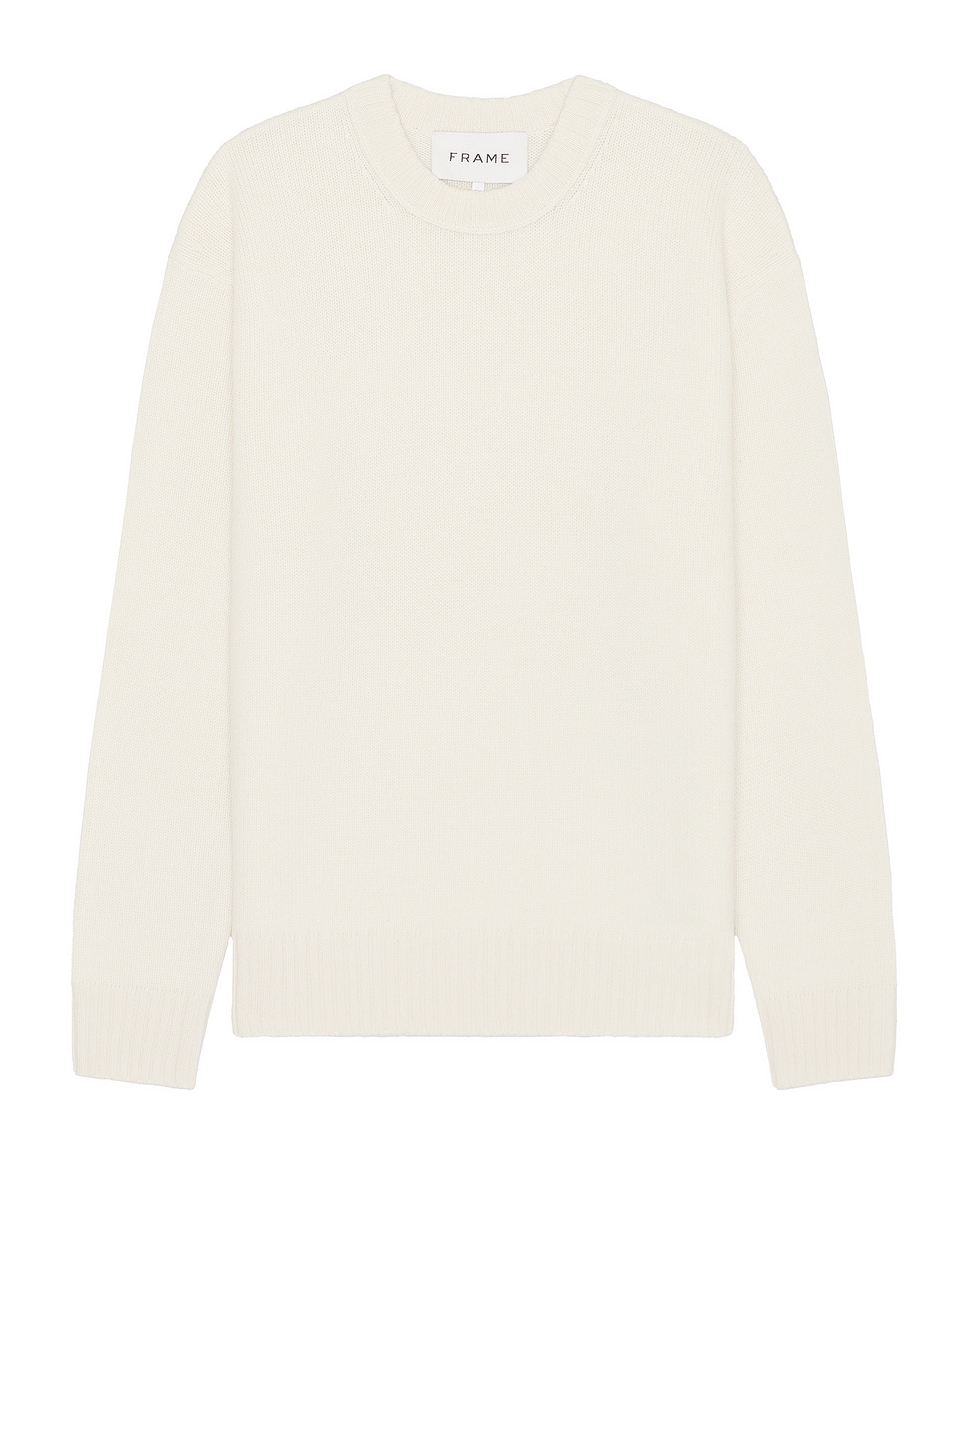 Image 1 of FRAME Cashmere Sweater in Cream